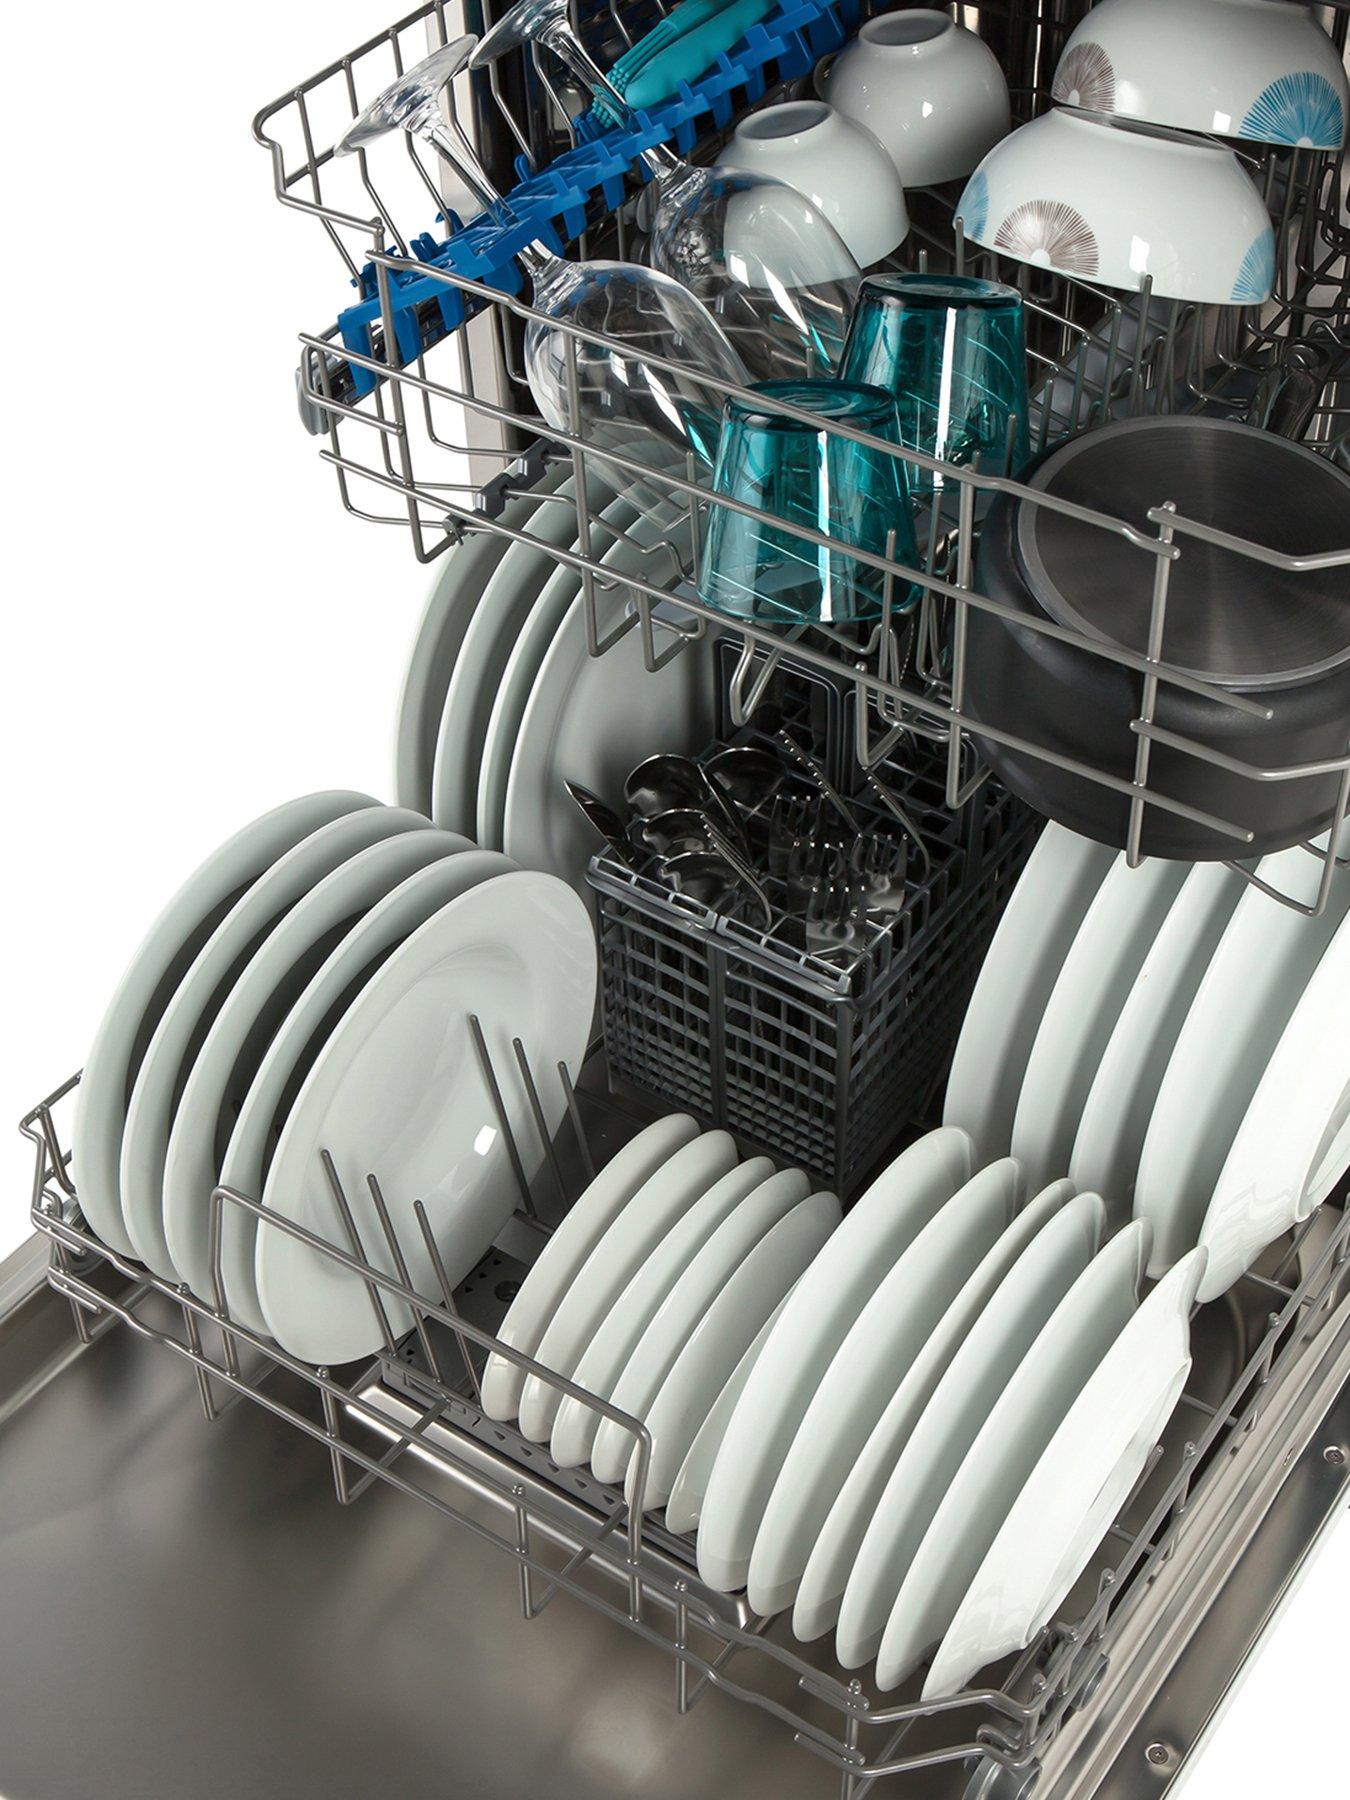 candy cdi1ls38s fully integrated standard dishwasher